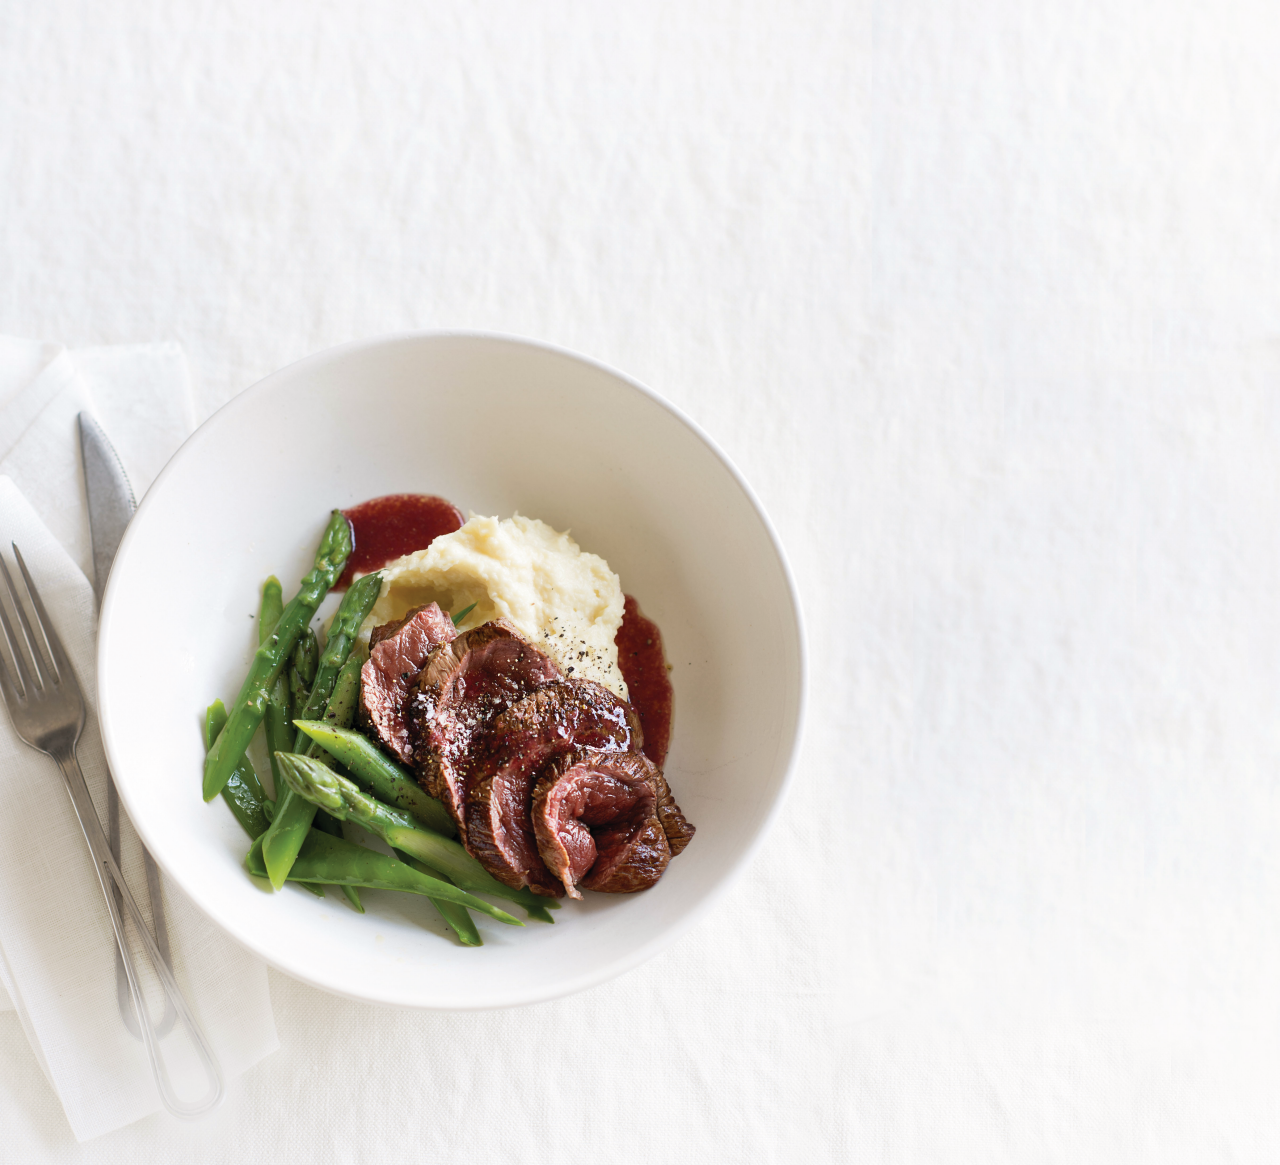 Homecook of the Year recipe - Roast Venison with Boysenberry Sauce